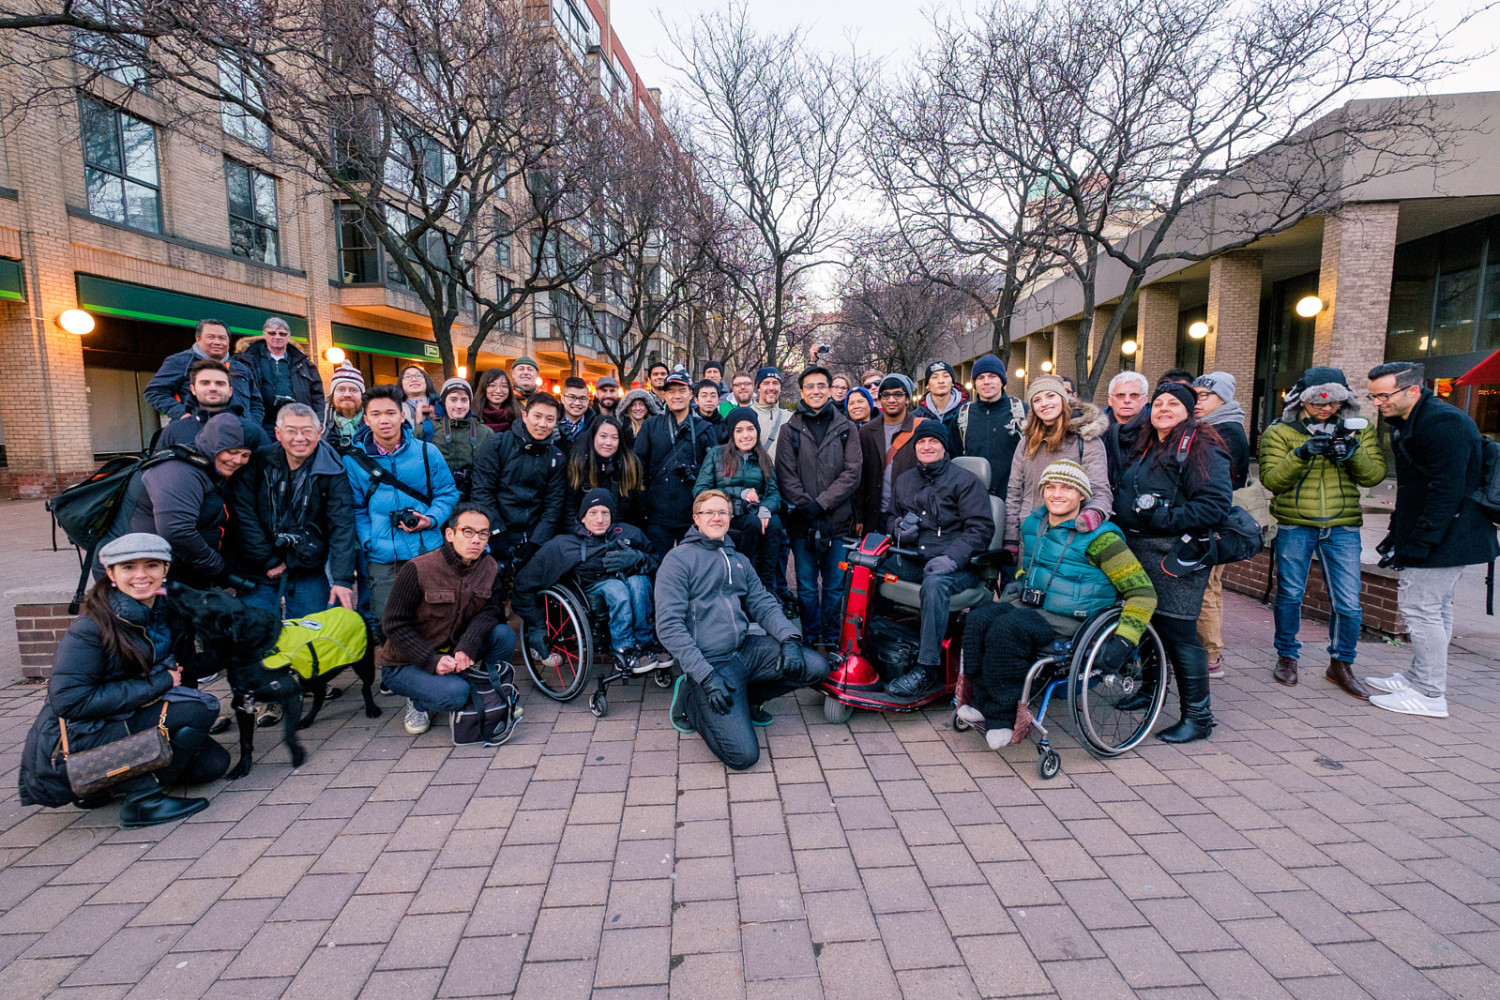 15 Photos from Toronto's First Ever Accessible Photowalk